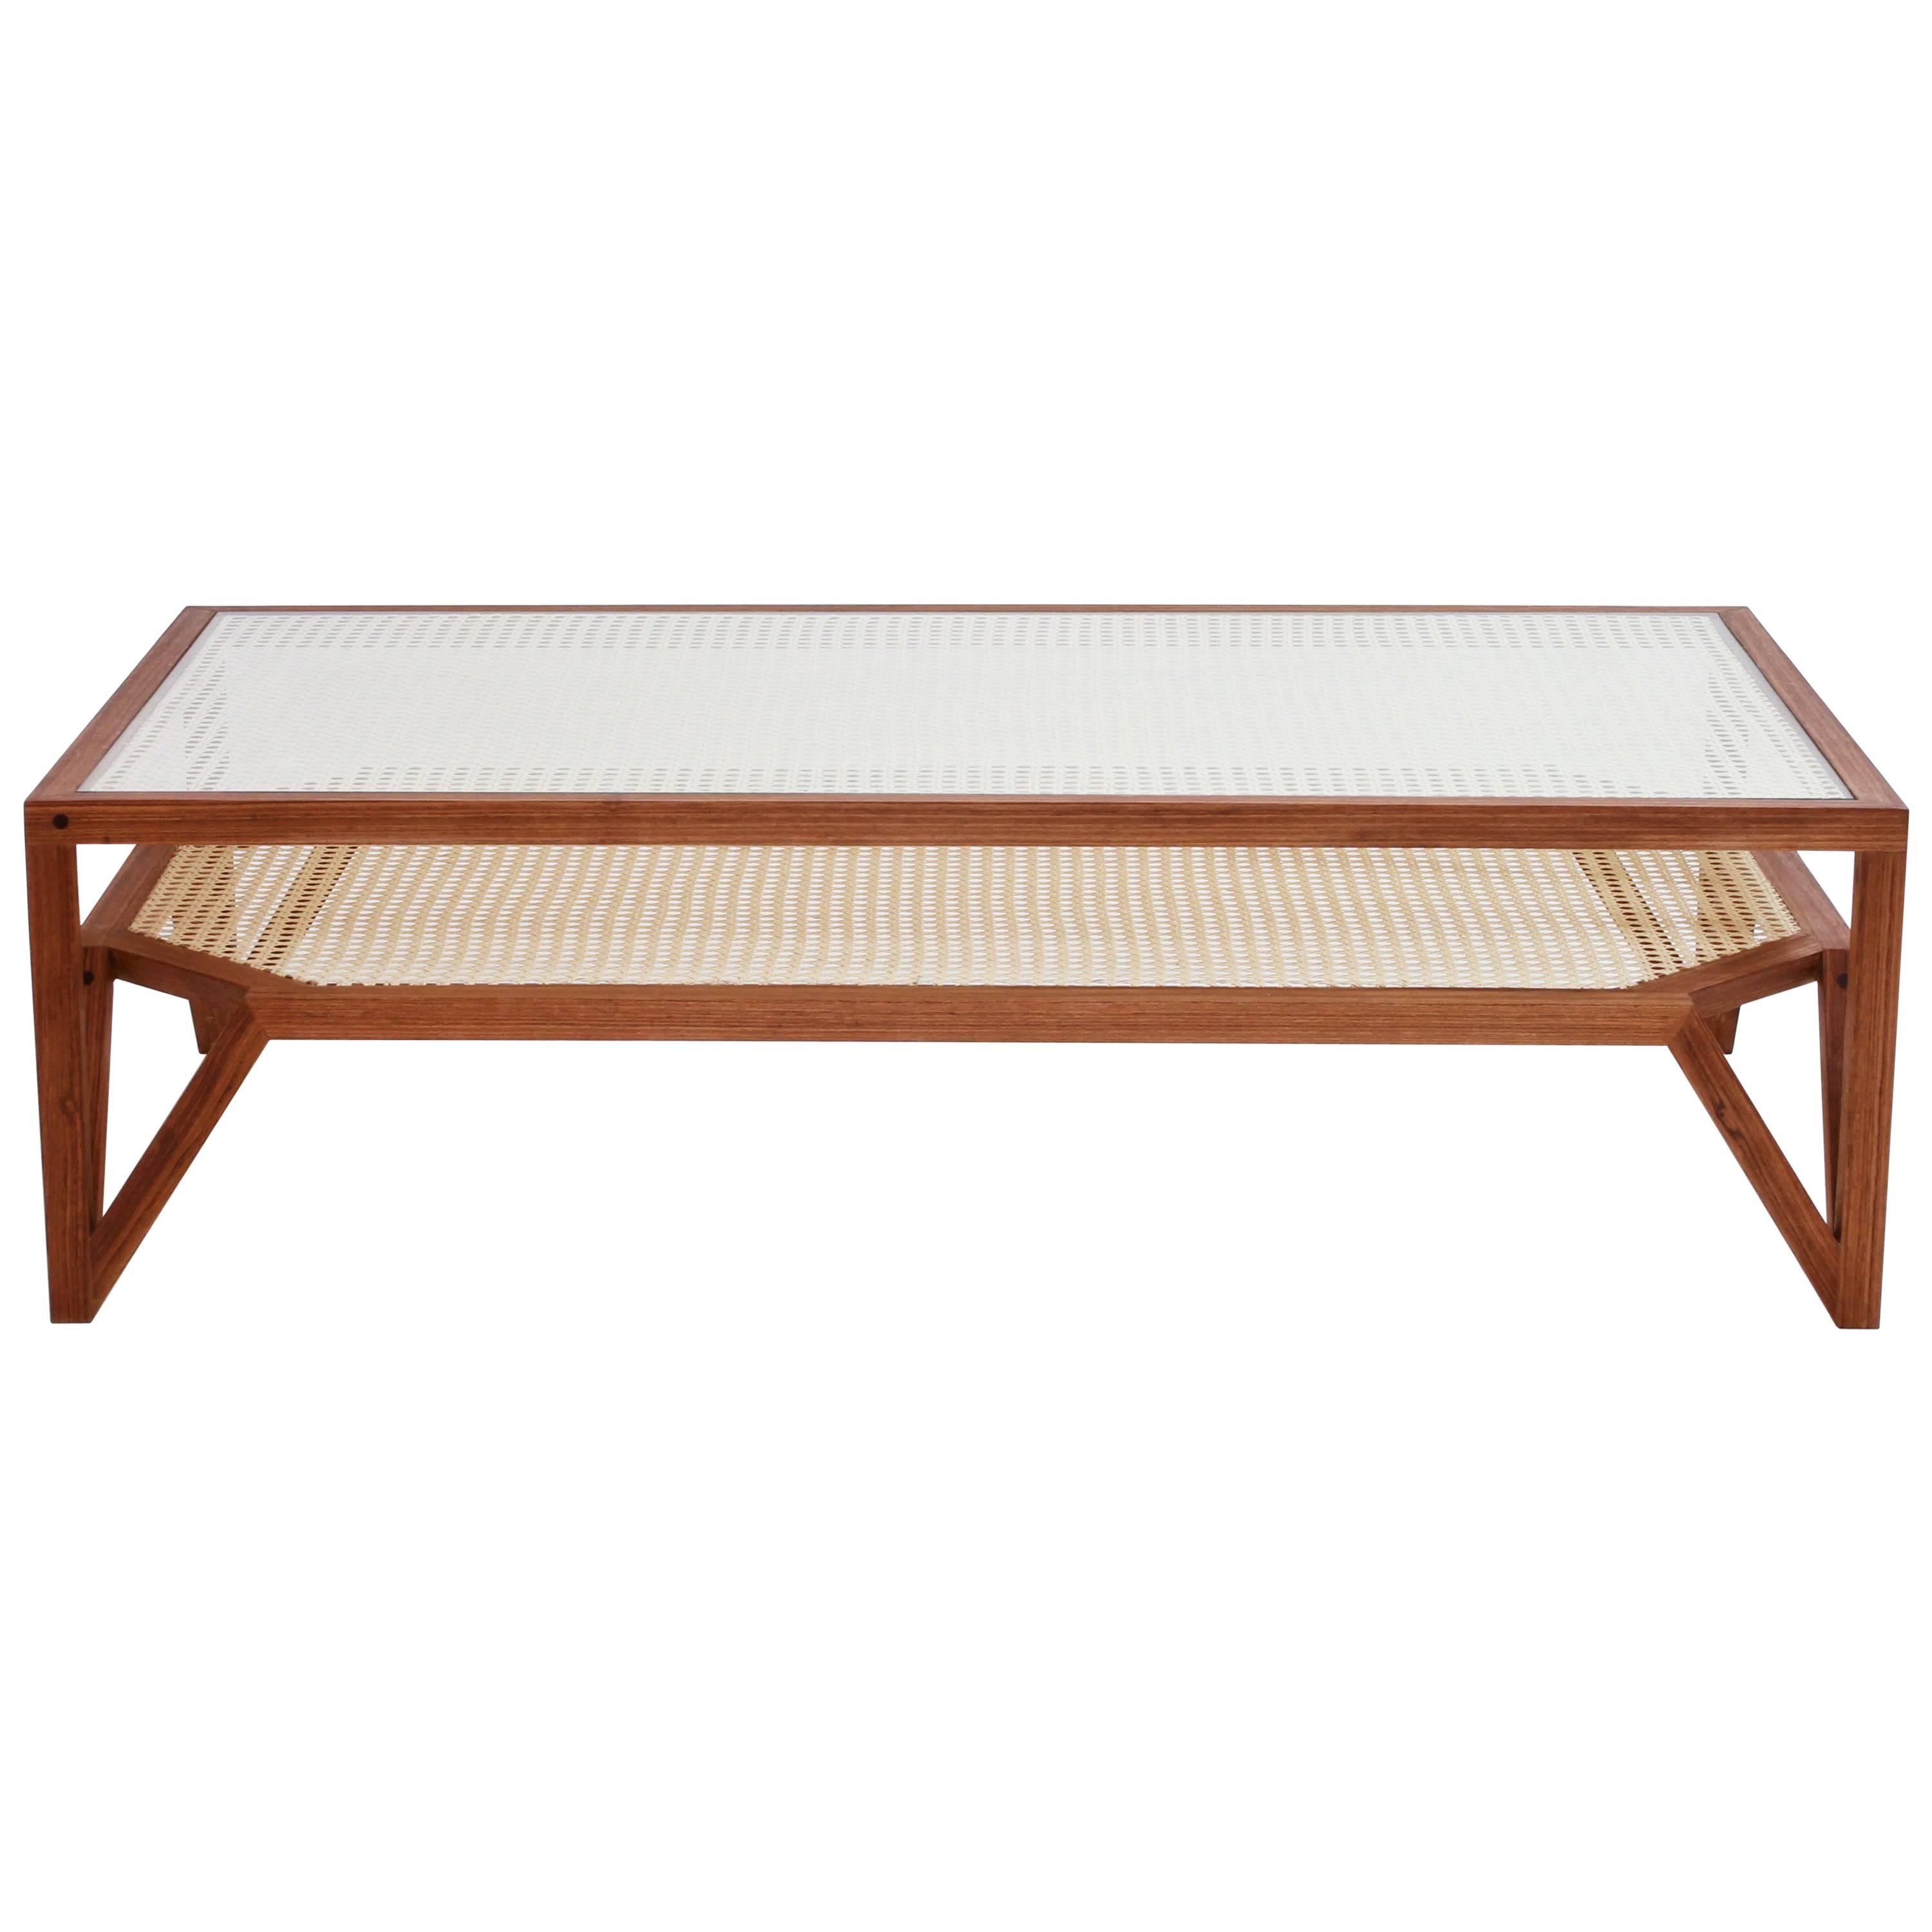 Coffee Table in Hardwood and Woven Cane. Contemporary Design by O Formigueiro. For Sale